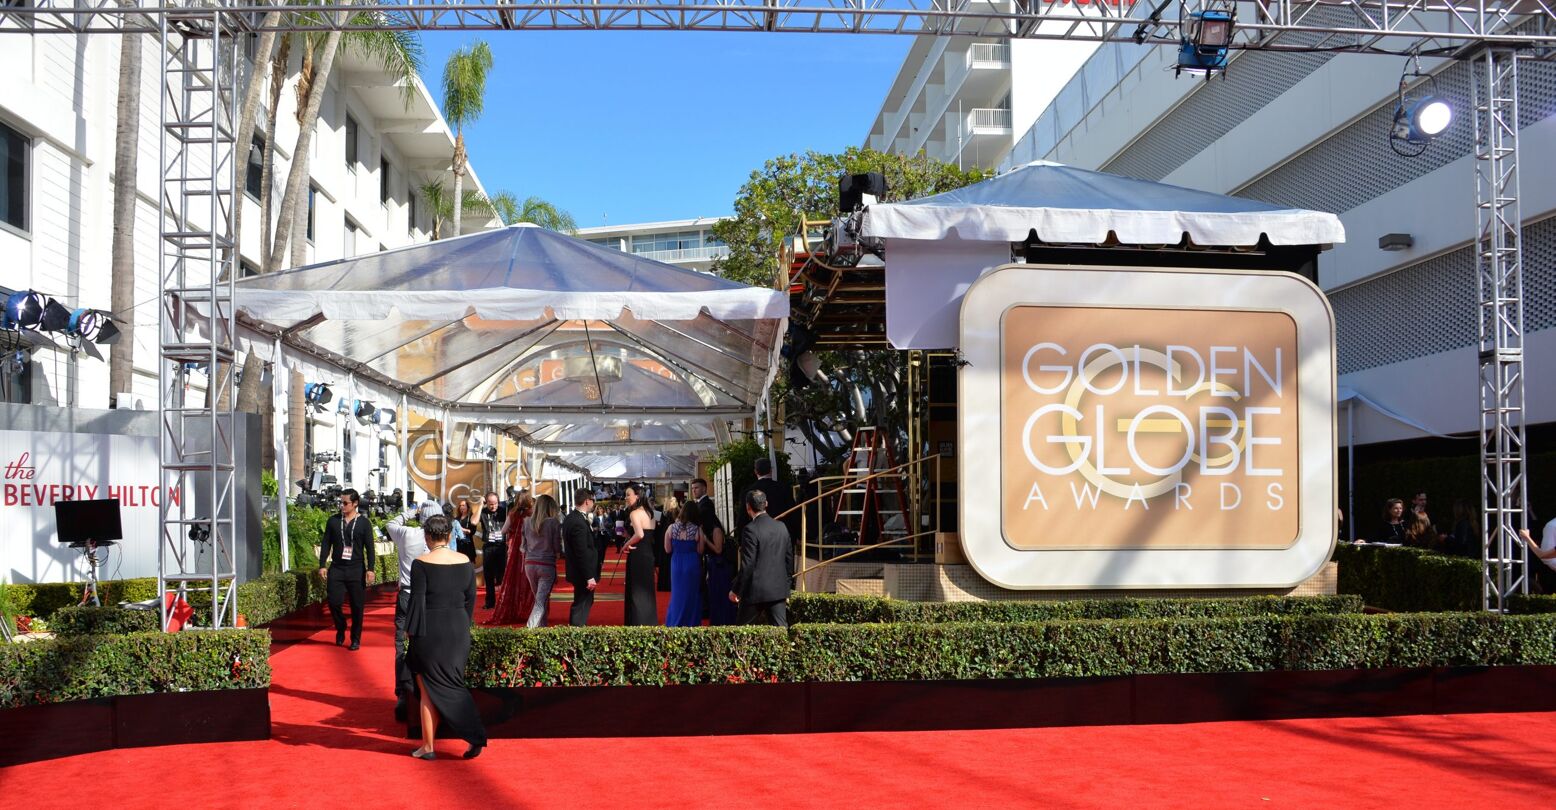 Atmosphere at the 74th Golden Globe Awards at The Beverly Hilton Hotel, Los Angeles